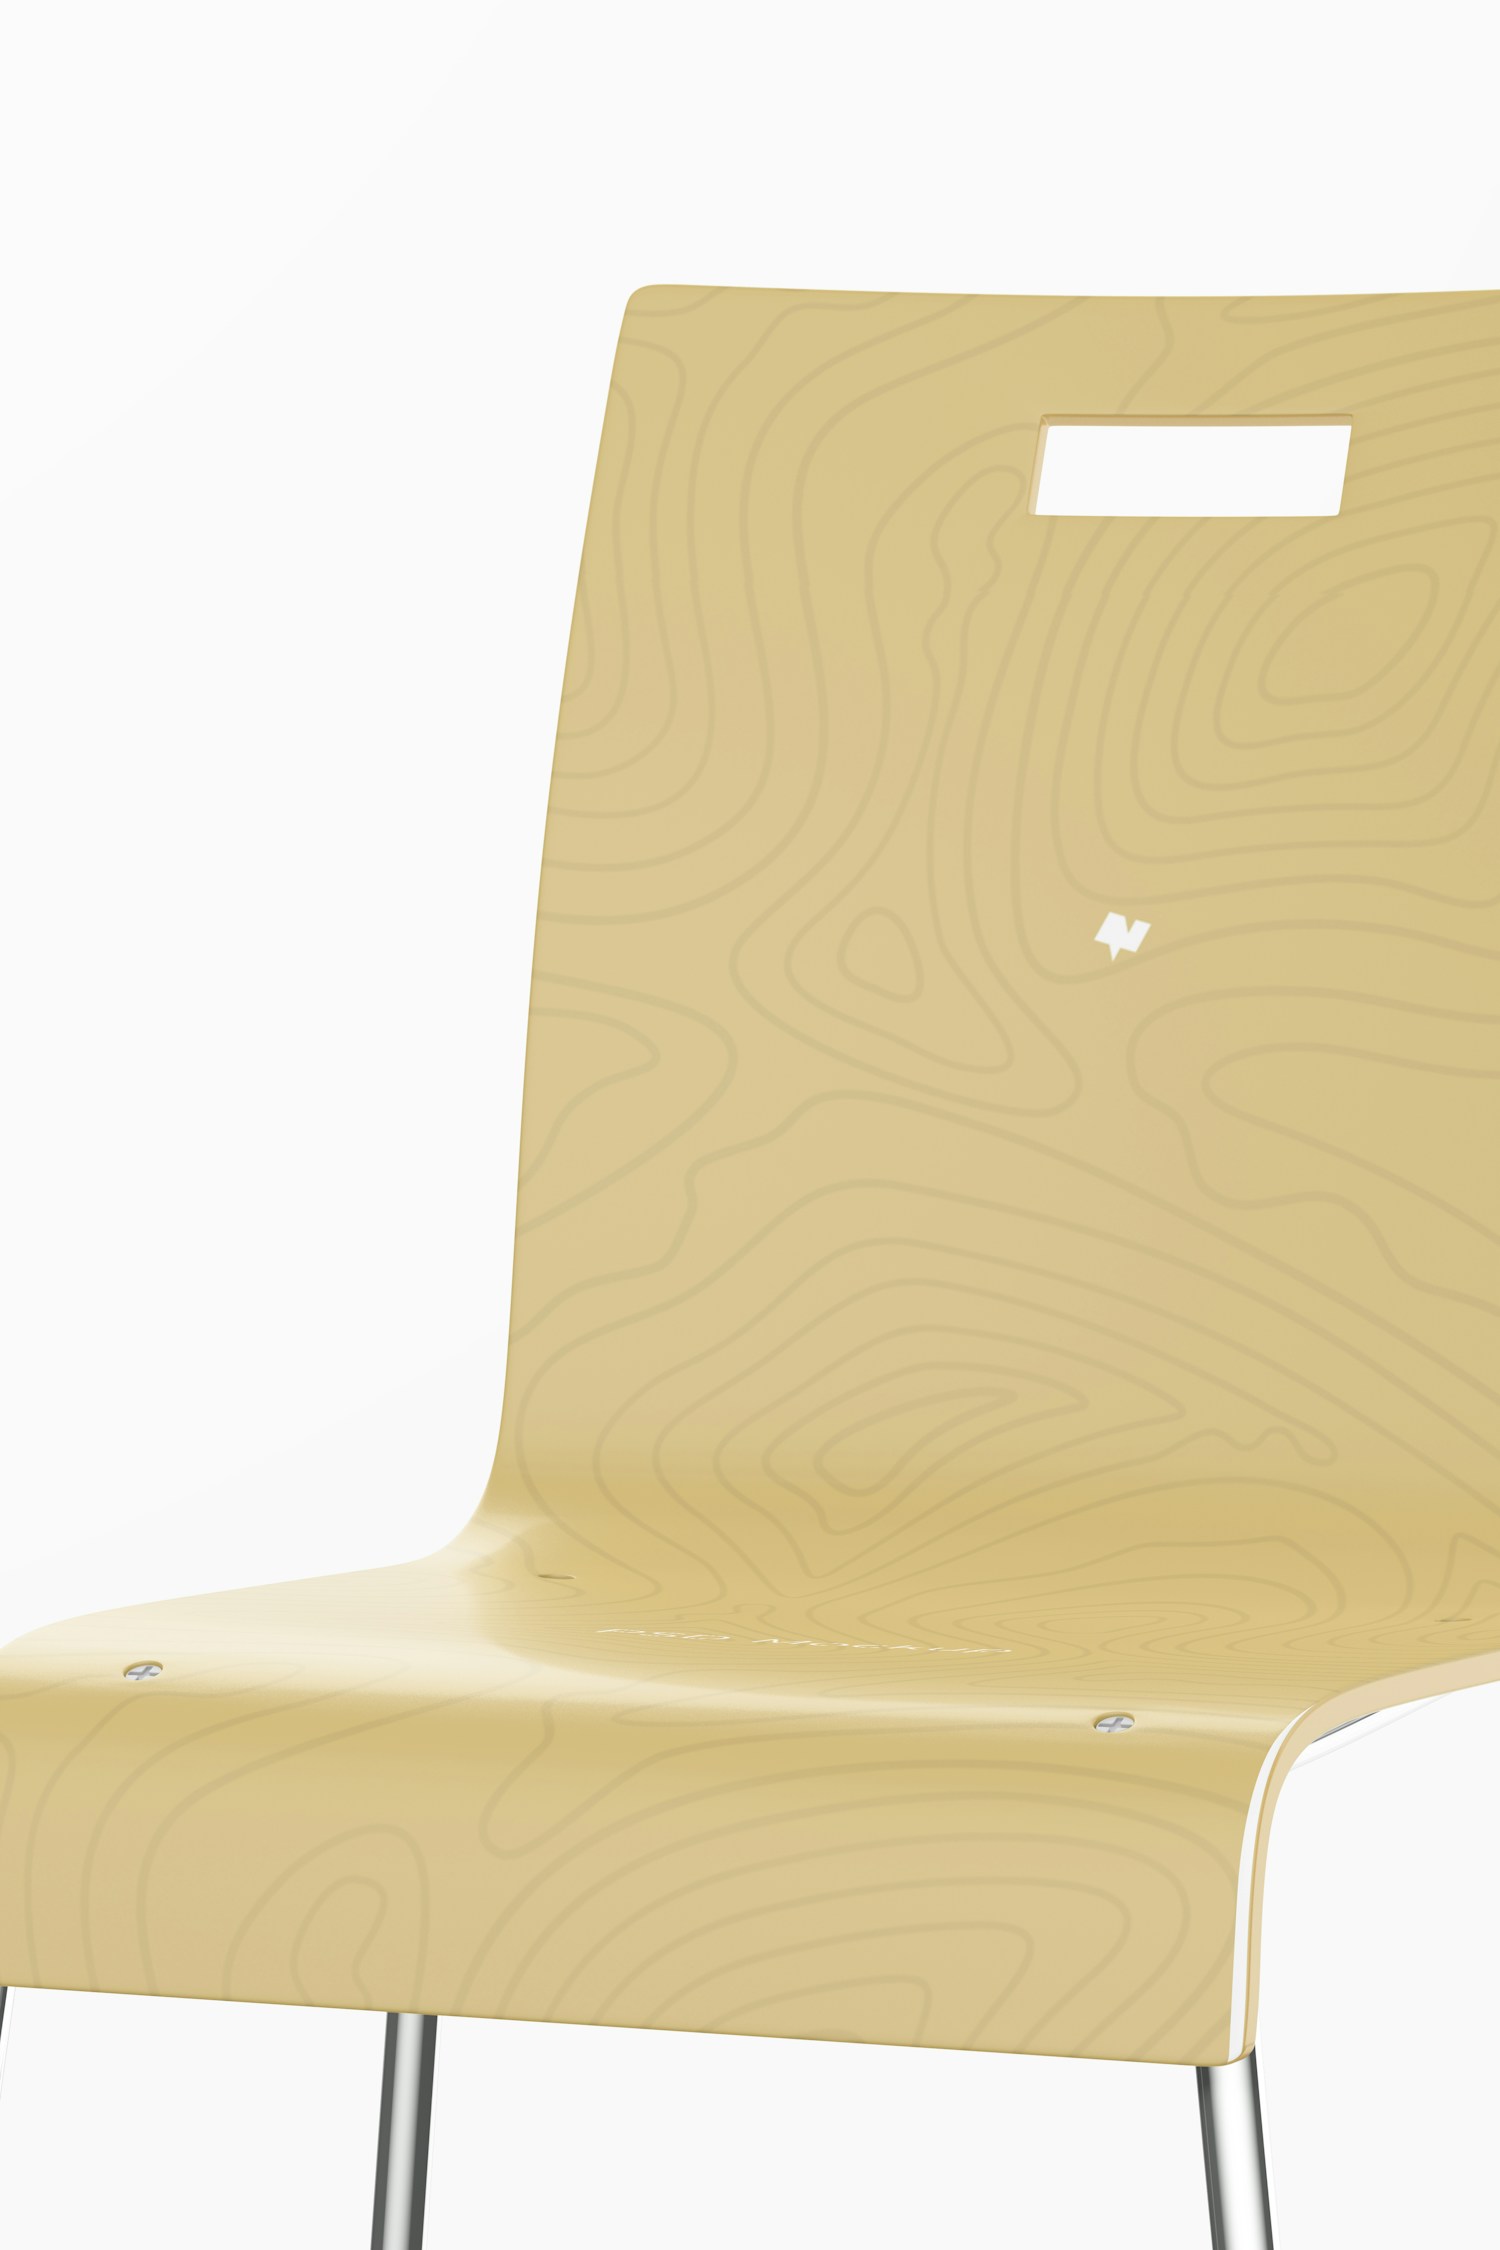 Metal Dining Chair Mockup, Close Up